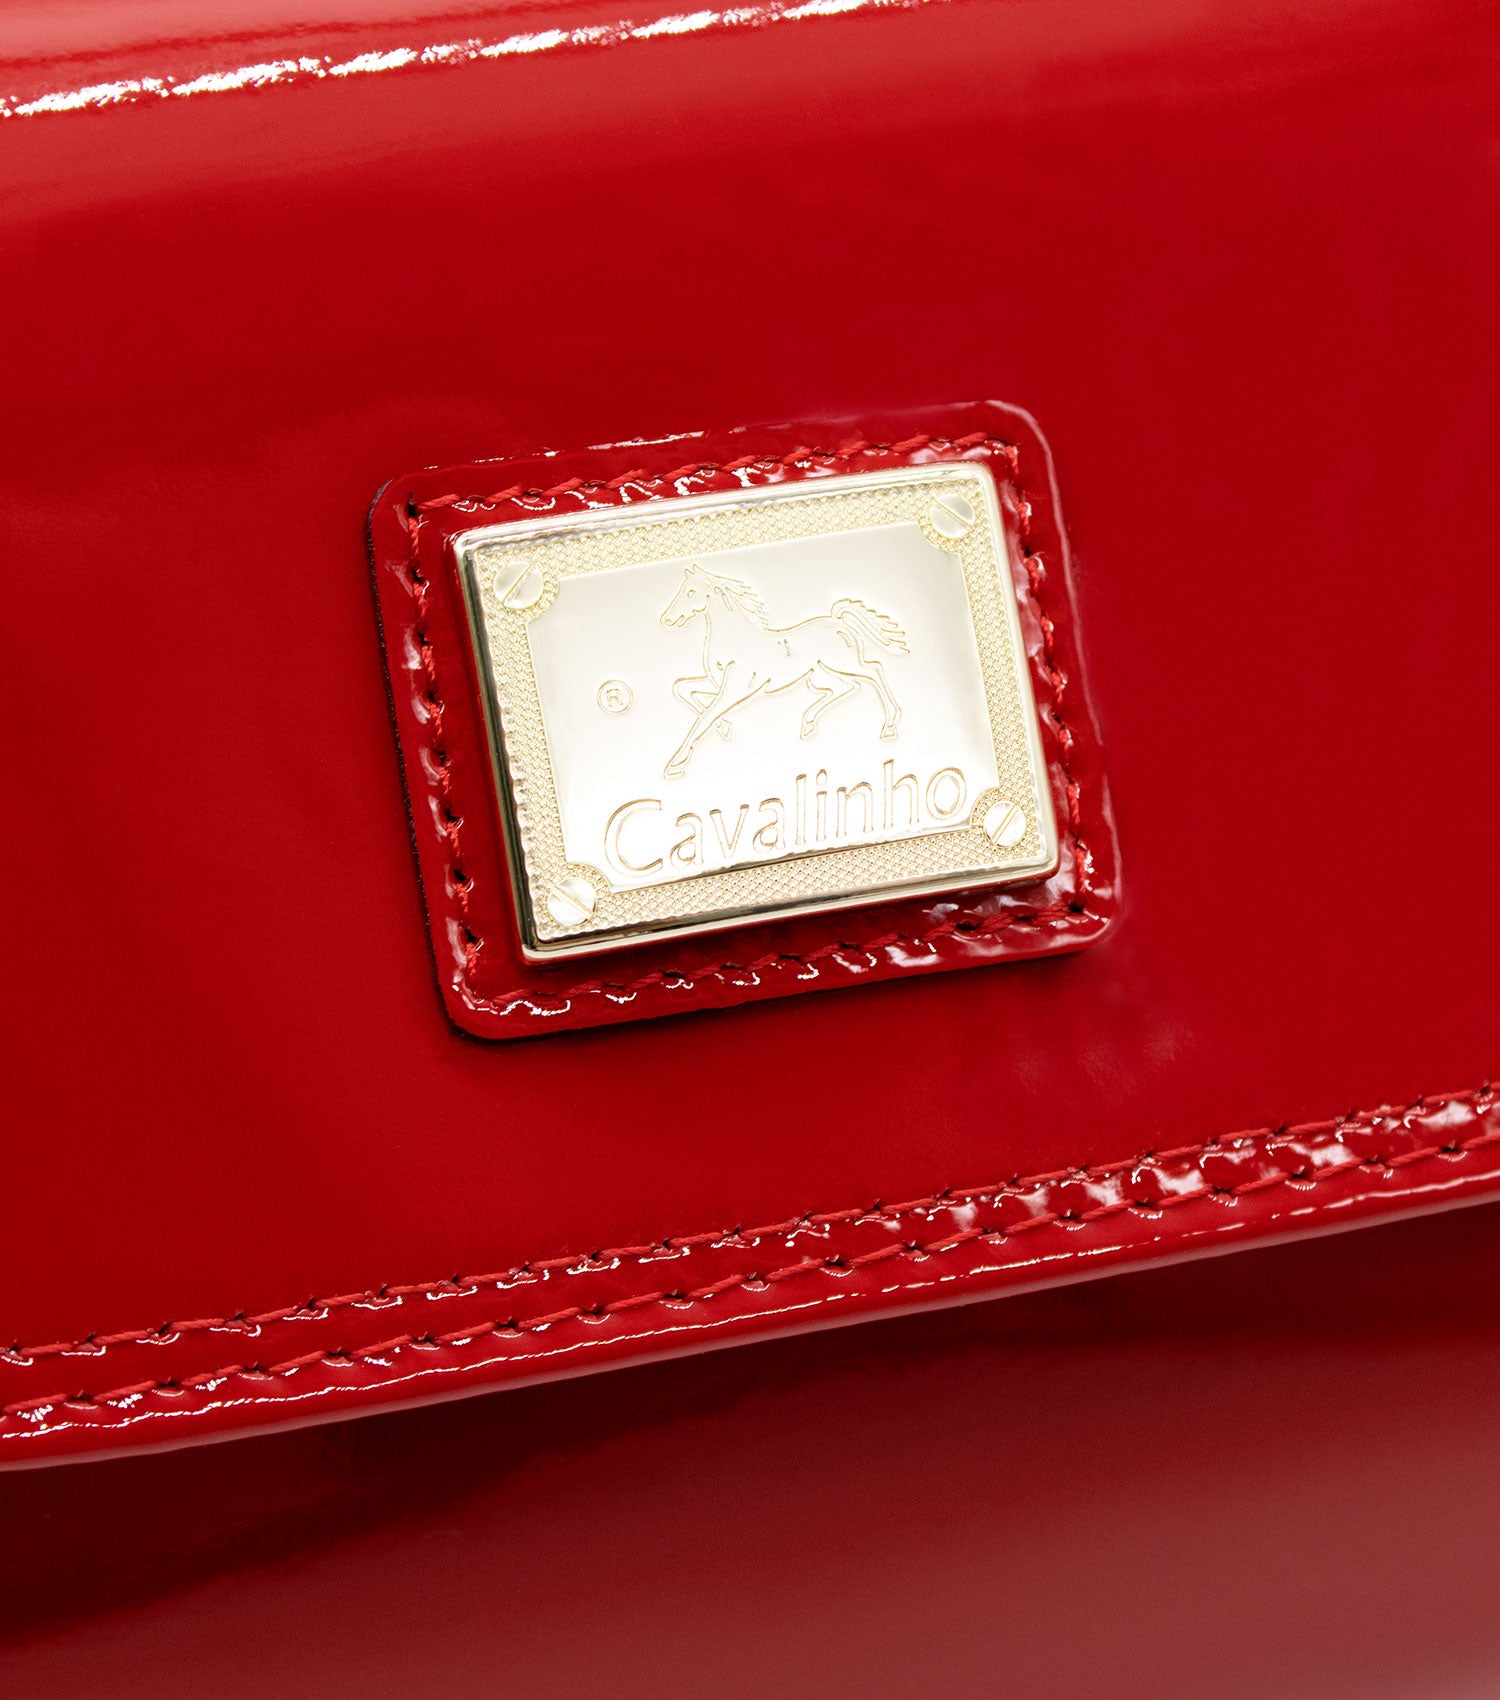 Cavalinho All In Patent Leather Clutch or Shoulder Bag - Red - 18090491.04_P04